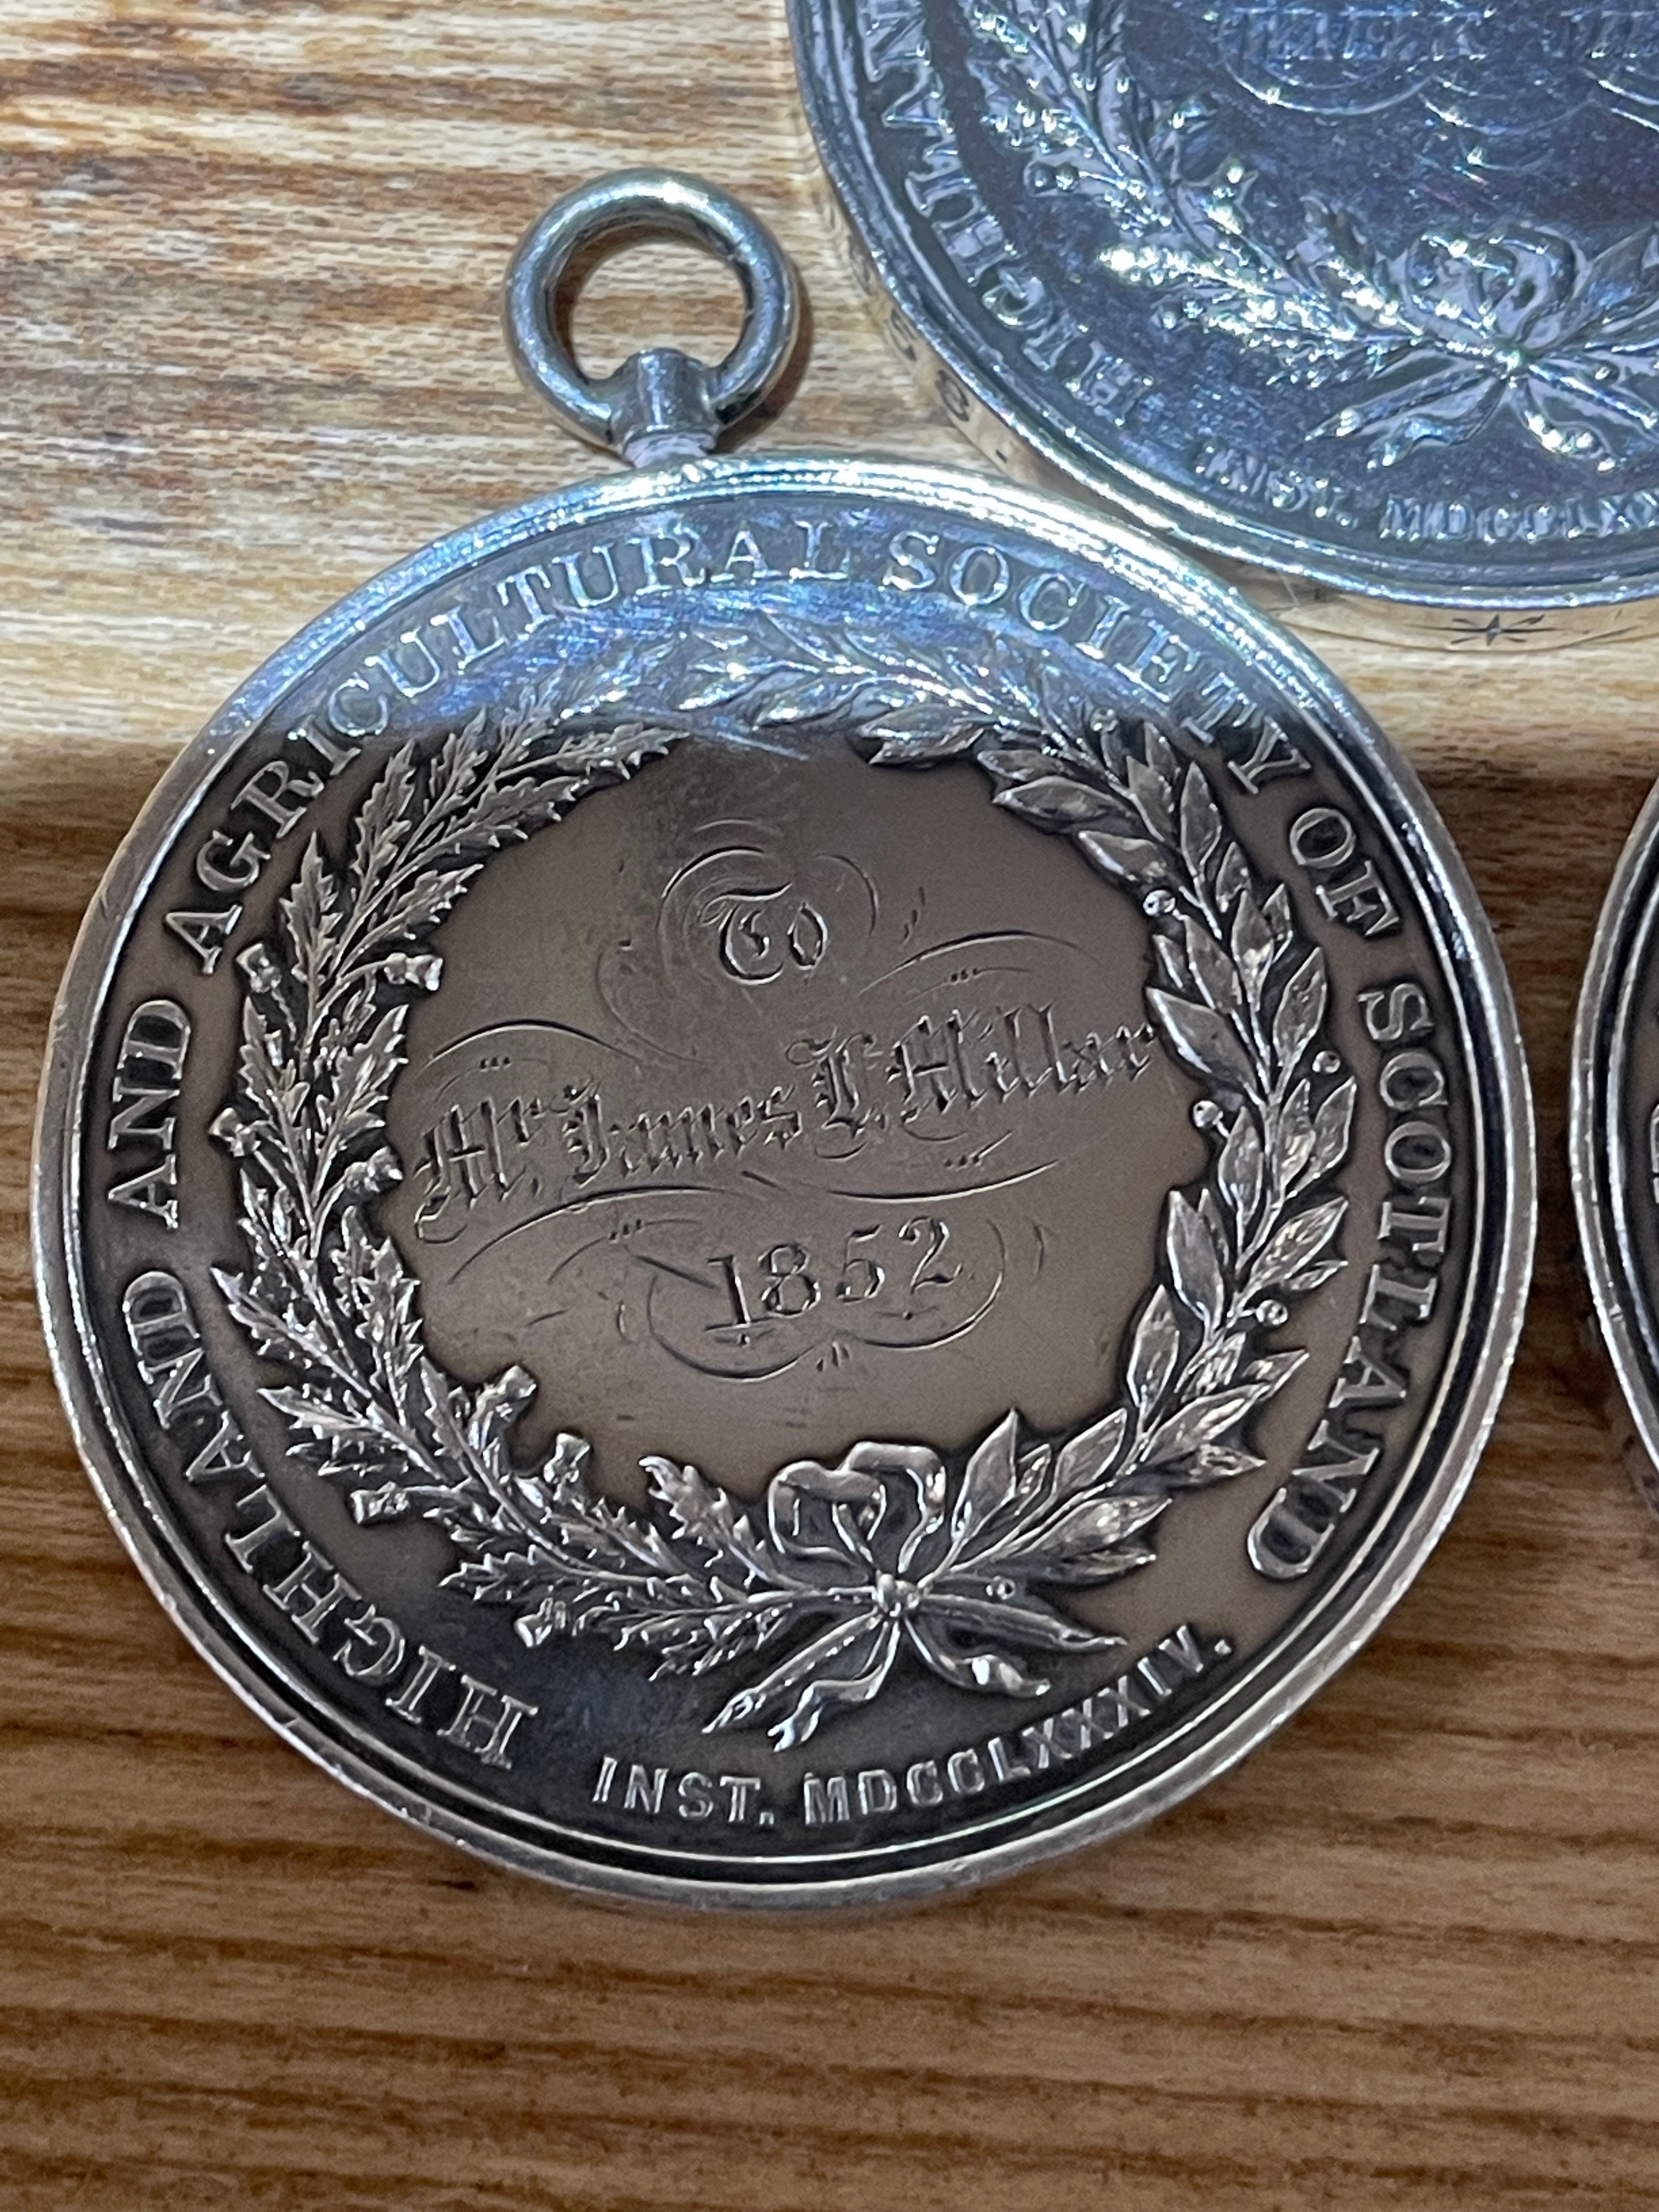 Lot of 3 Victorian Highland and Scottish Agricultural Society Medals - 44mm diameter. - Image 5 of 11